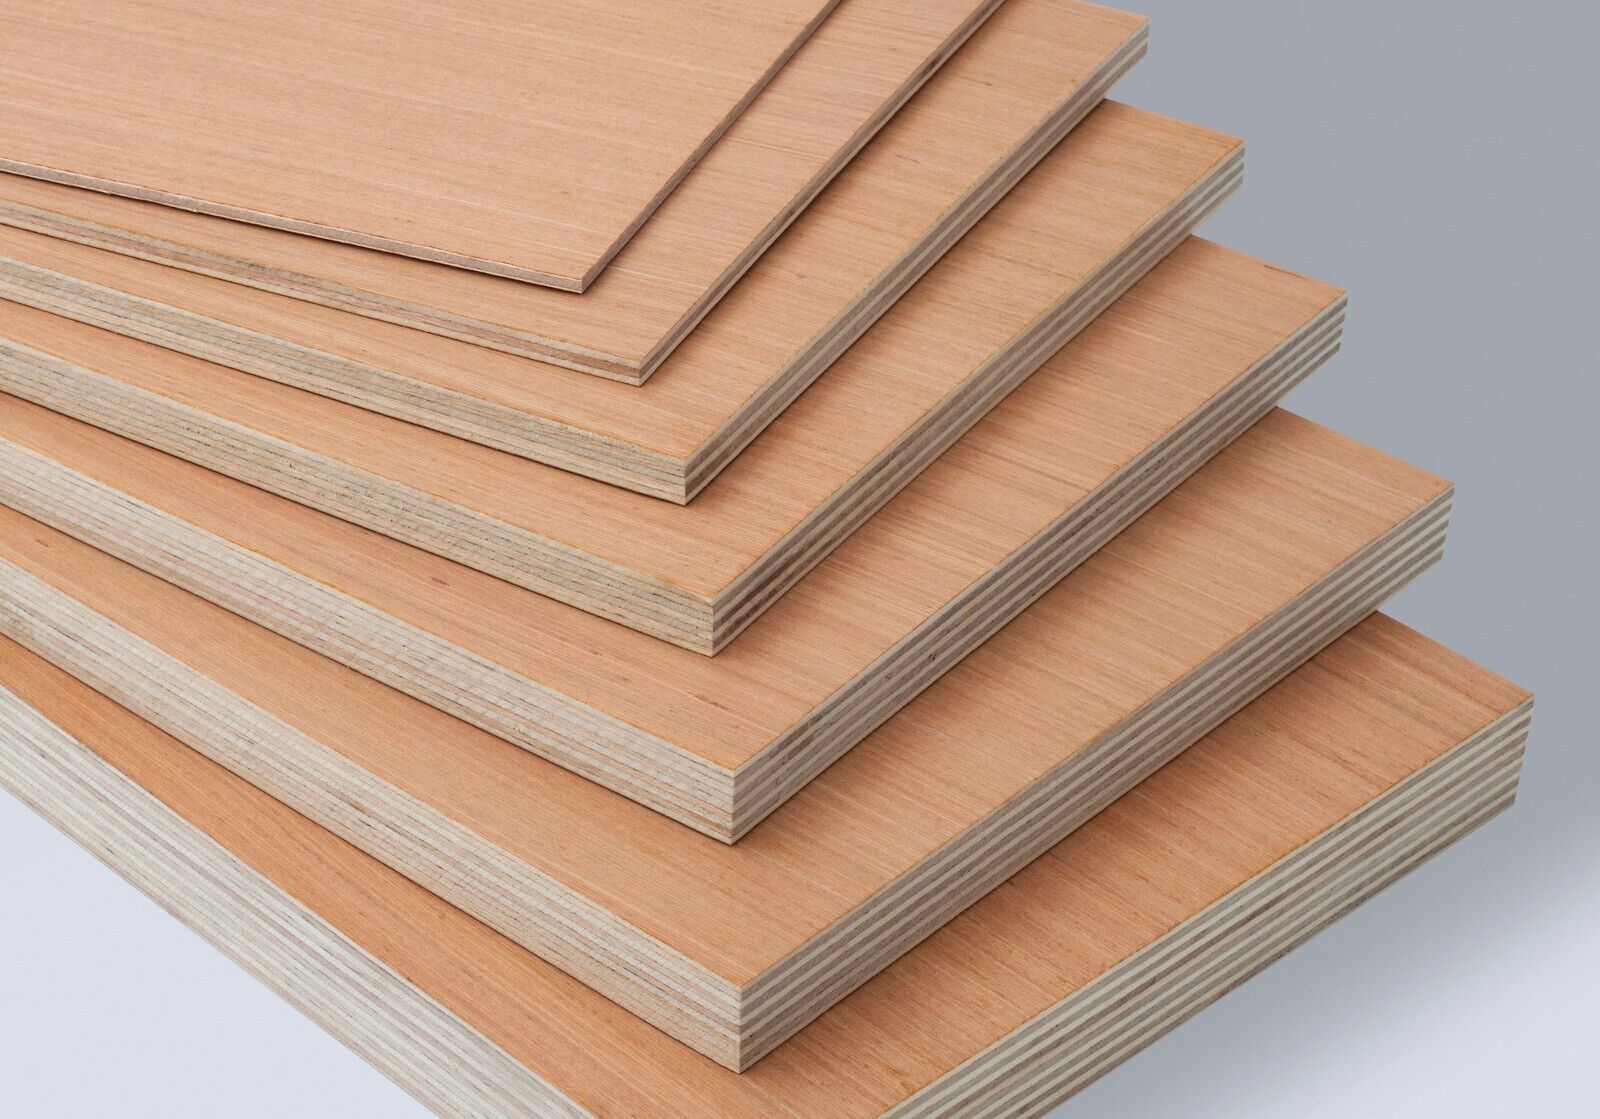 Birch/Hardwood Plywood Board Furniture Panel, Various Sizes, Thicknesses and Types - RizAndMicaMake